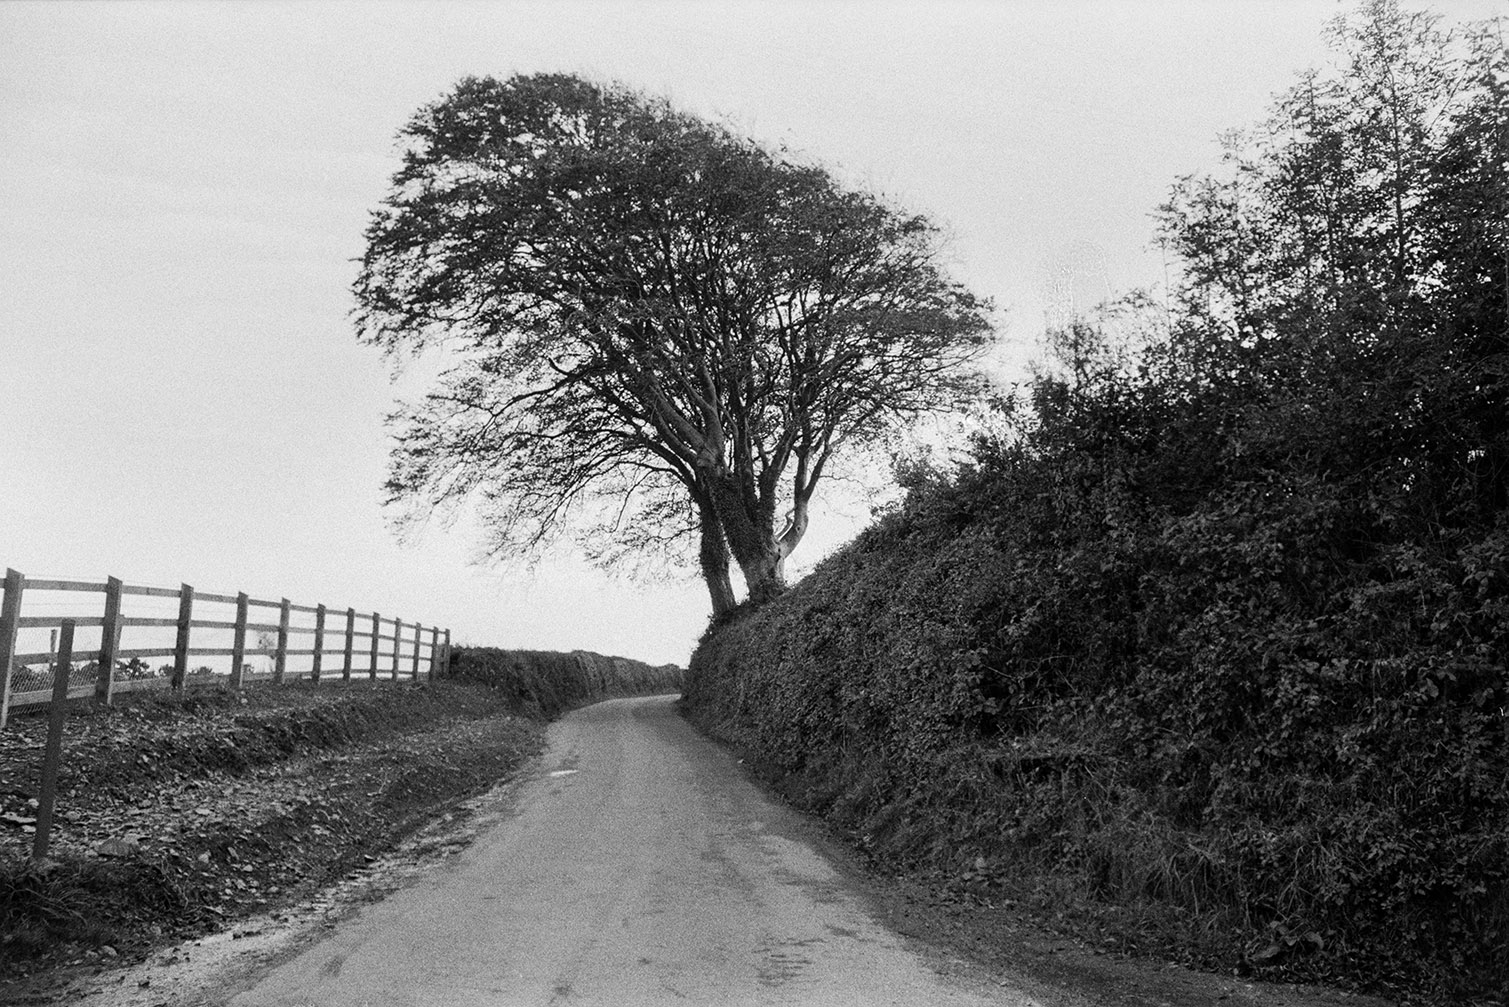 A lane with trees, a Devon hedge and a fence, in Atherington.